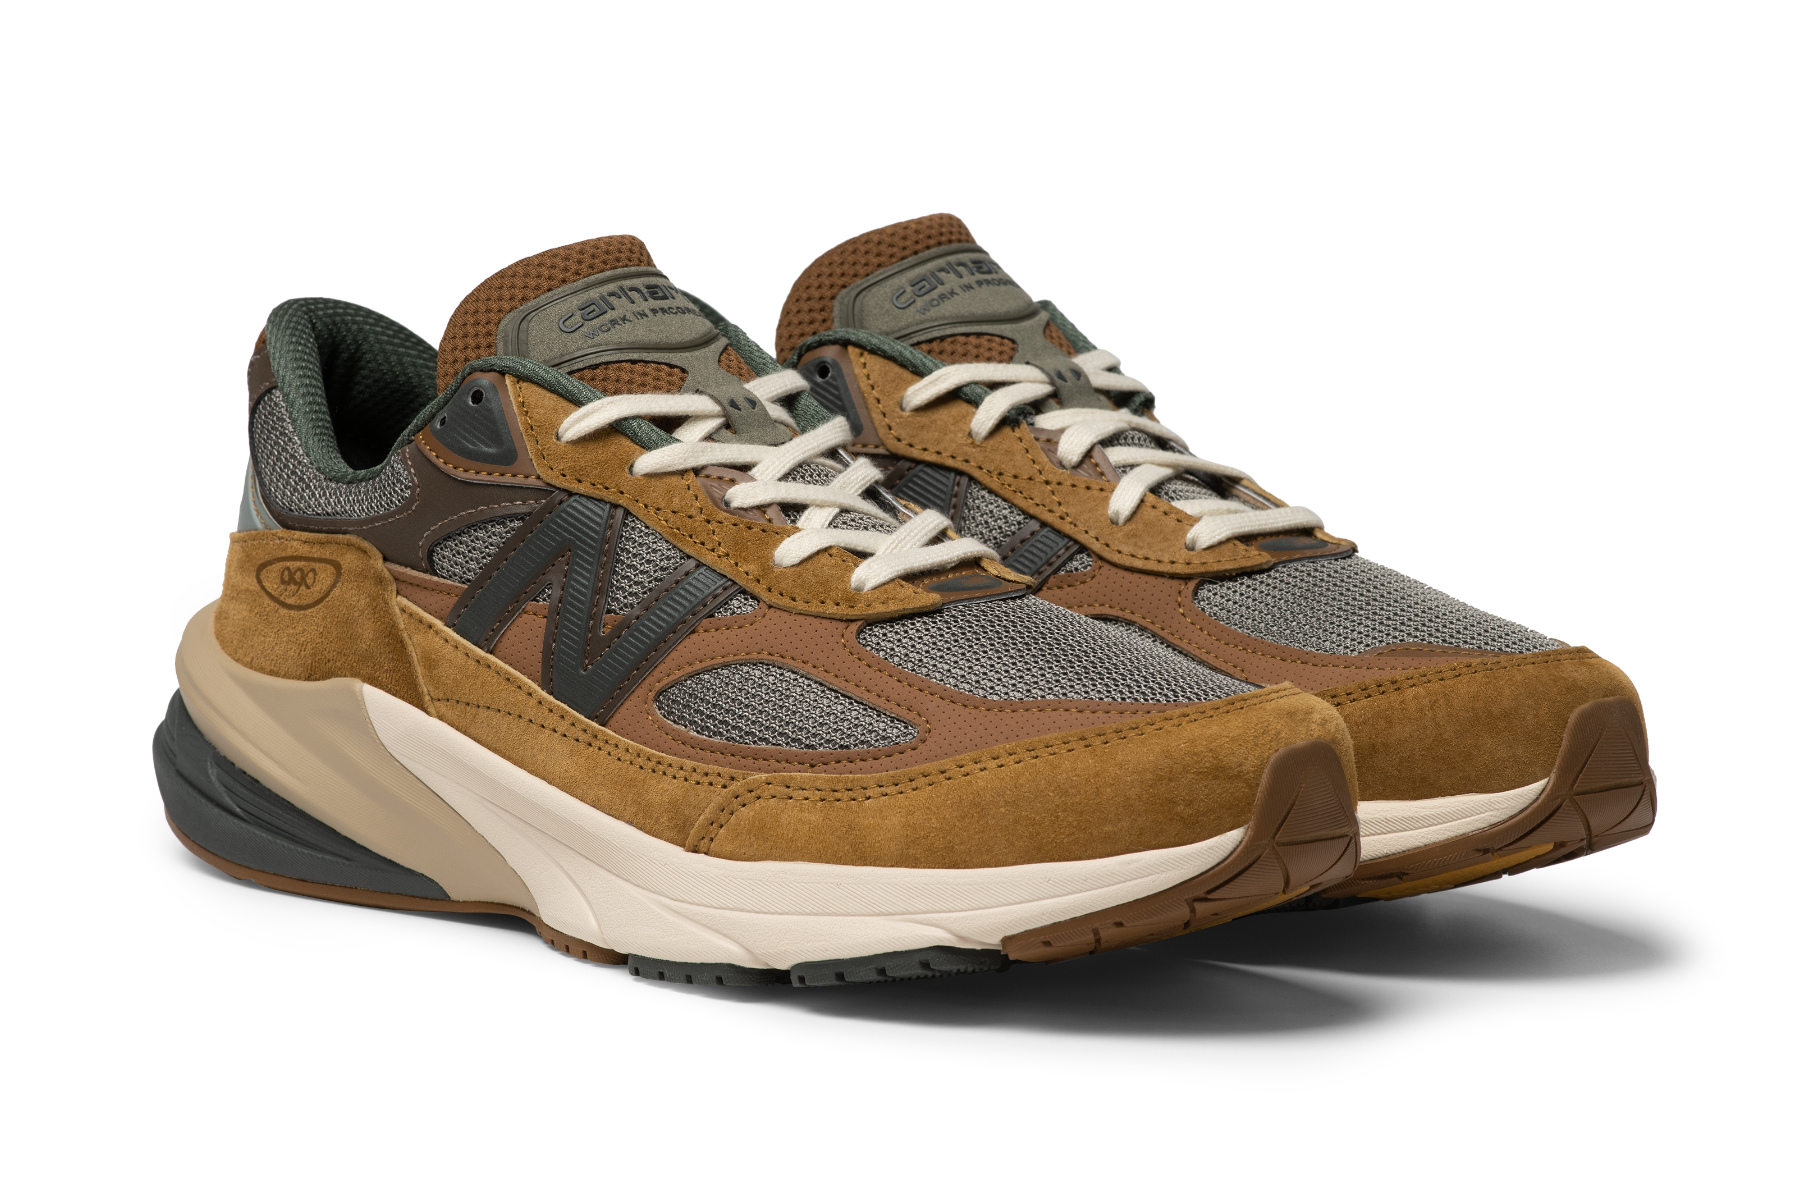 Carhartt WIP's New Balance Sneaker Collab Is Dropping